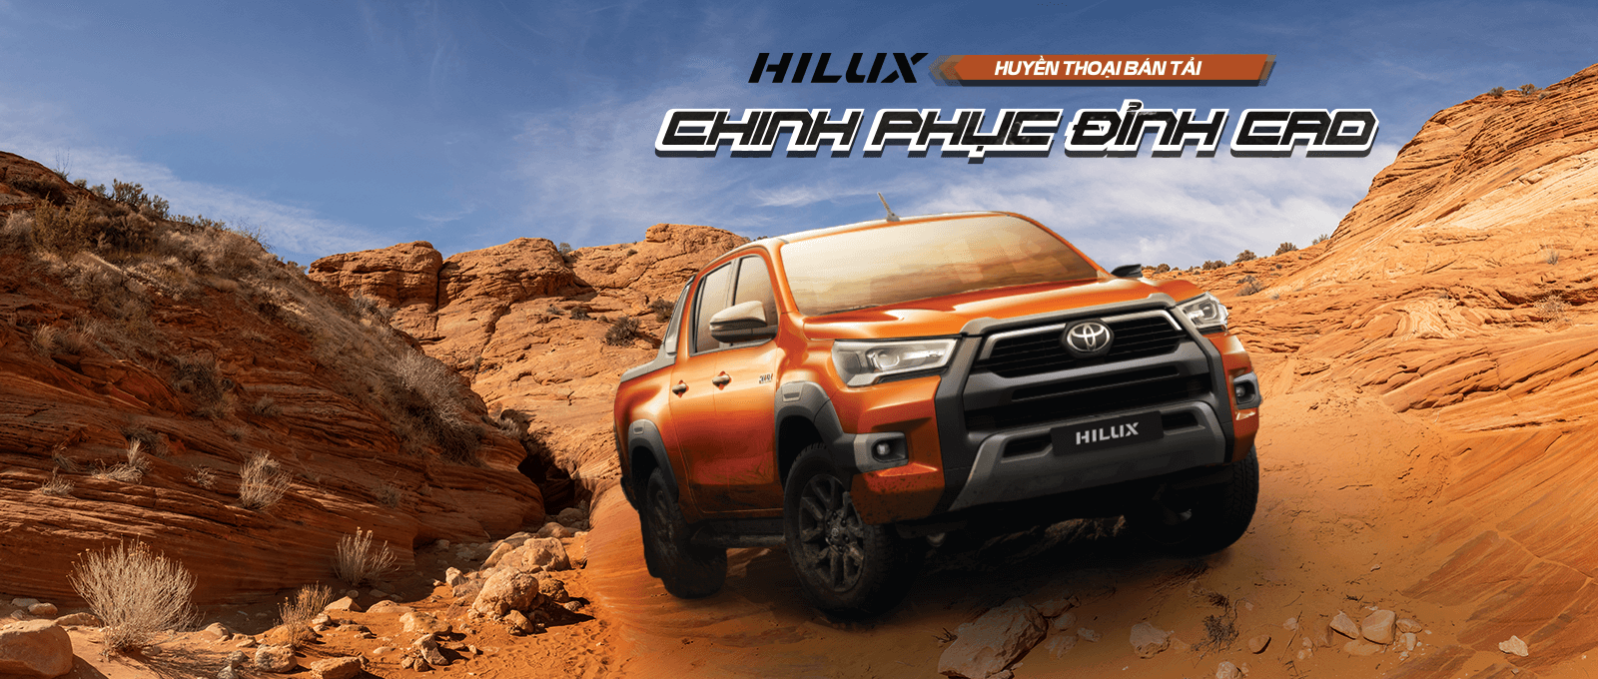 hilux 2.4 4x2 at banner